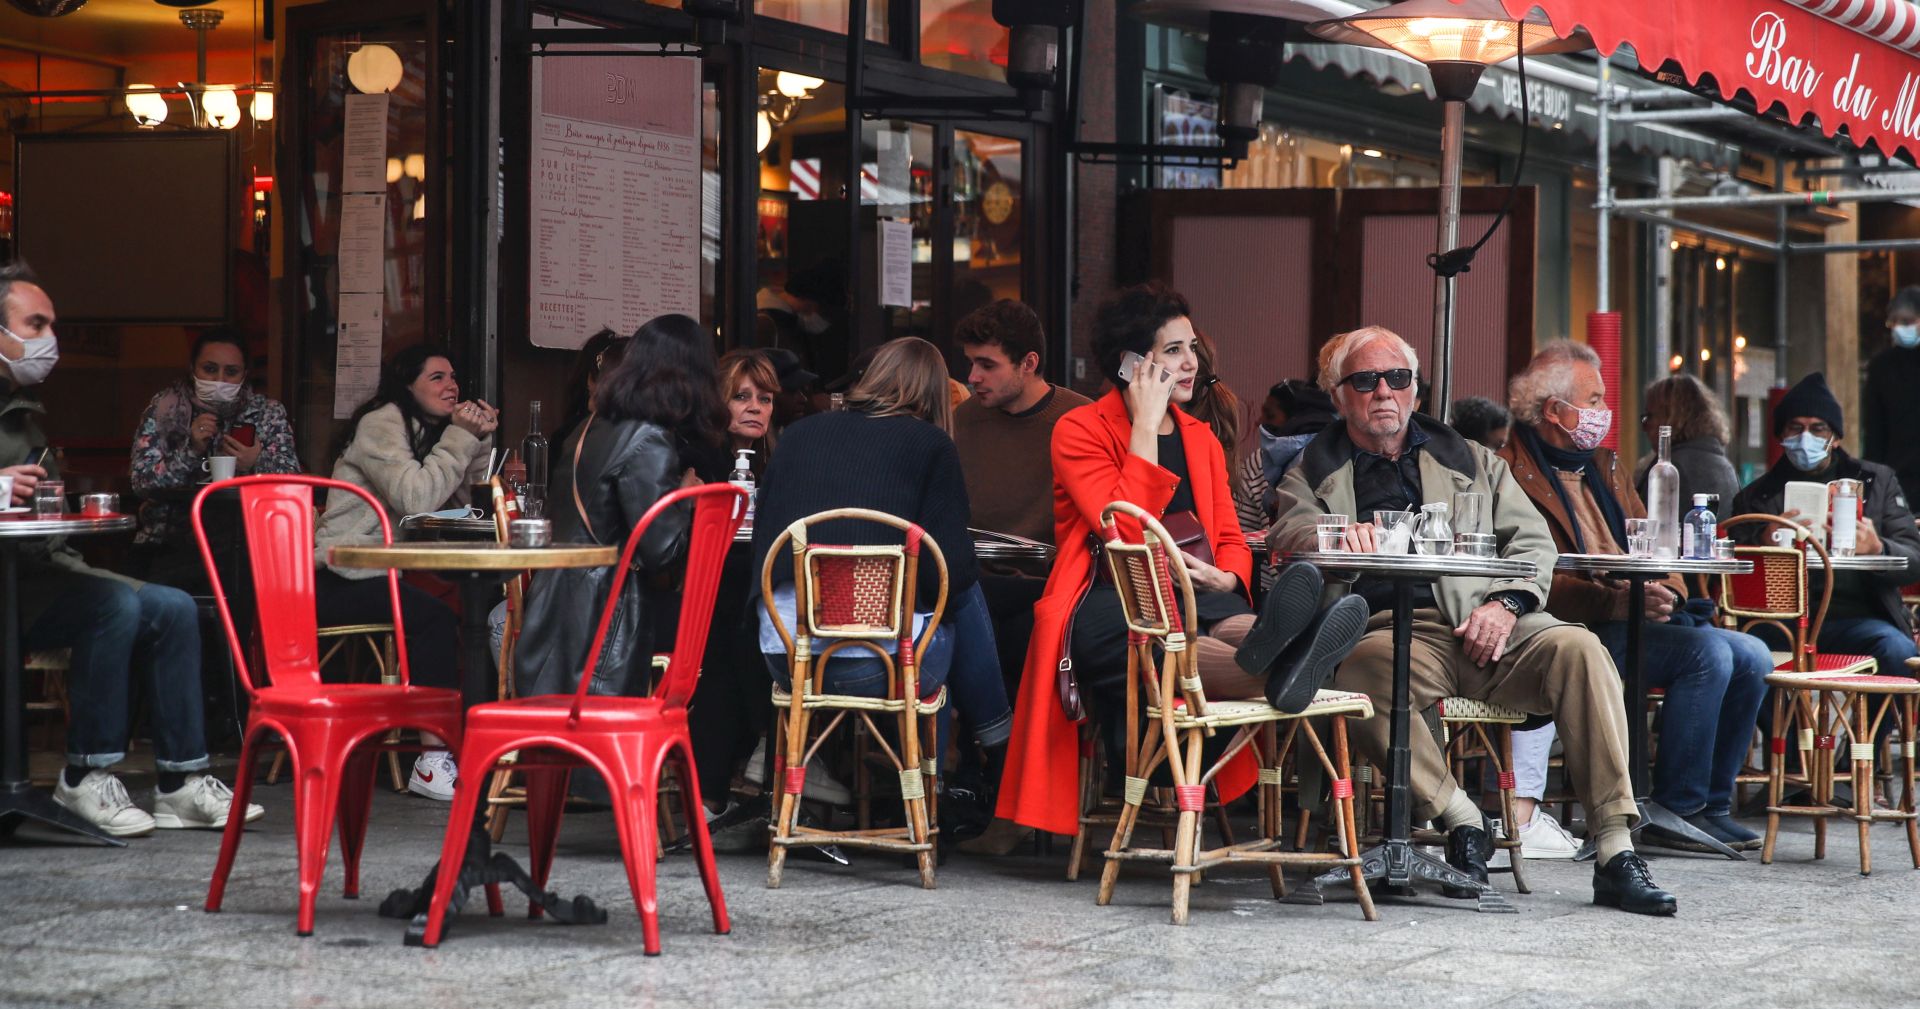 epa08783214 People sit on the terrasse of a restaurant in Paris, France, 29 October 2020. French President Emmanuel Macron announced a return to lockdown, dubbed 'reconfinement' to come into effect on 30 October 2020 as new measures to battle the rise in Covid-19 cases.  EPA/MOHAMMED BADRA